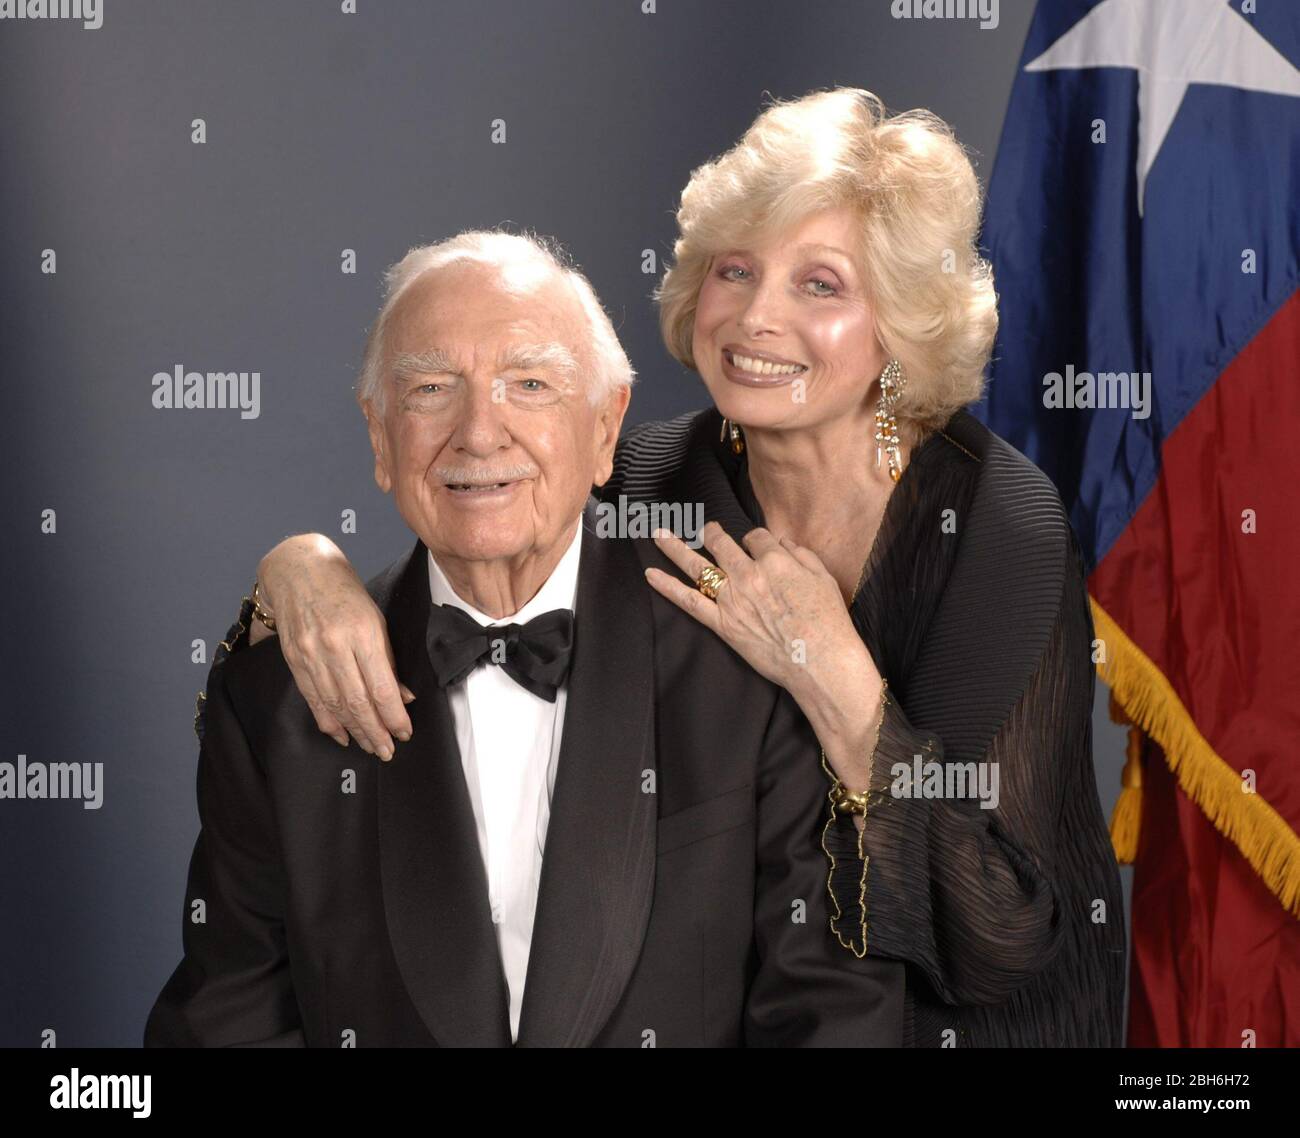 Austin, Texas USA, March 1, 2006: Former CBS newsman Walter Cronkite (left) and new fiancee Joanna Simon pose while greeting guests at a Texas Independence Day fete at the Texas State History Museum.  Cronkite, 89, was honored for a lifetime of achievement in Texas.    ©Bob Daemmrich Stock Photo